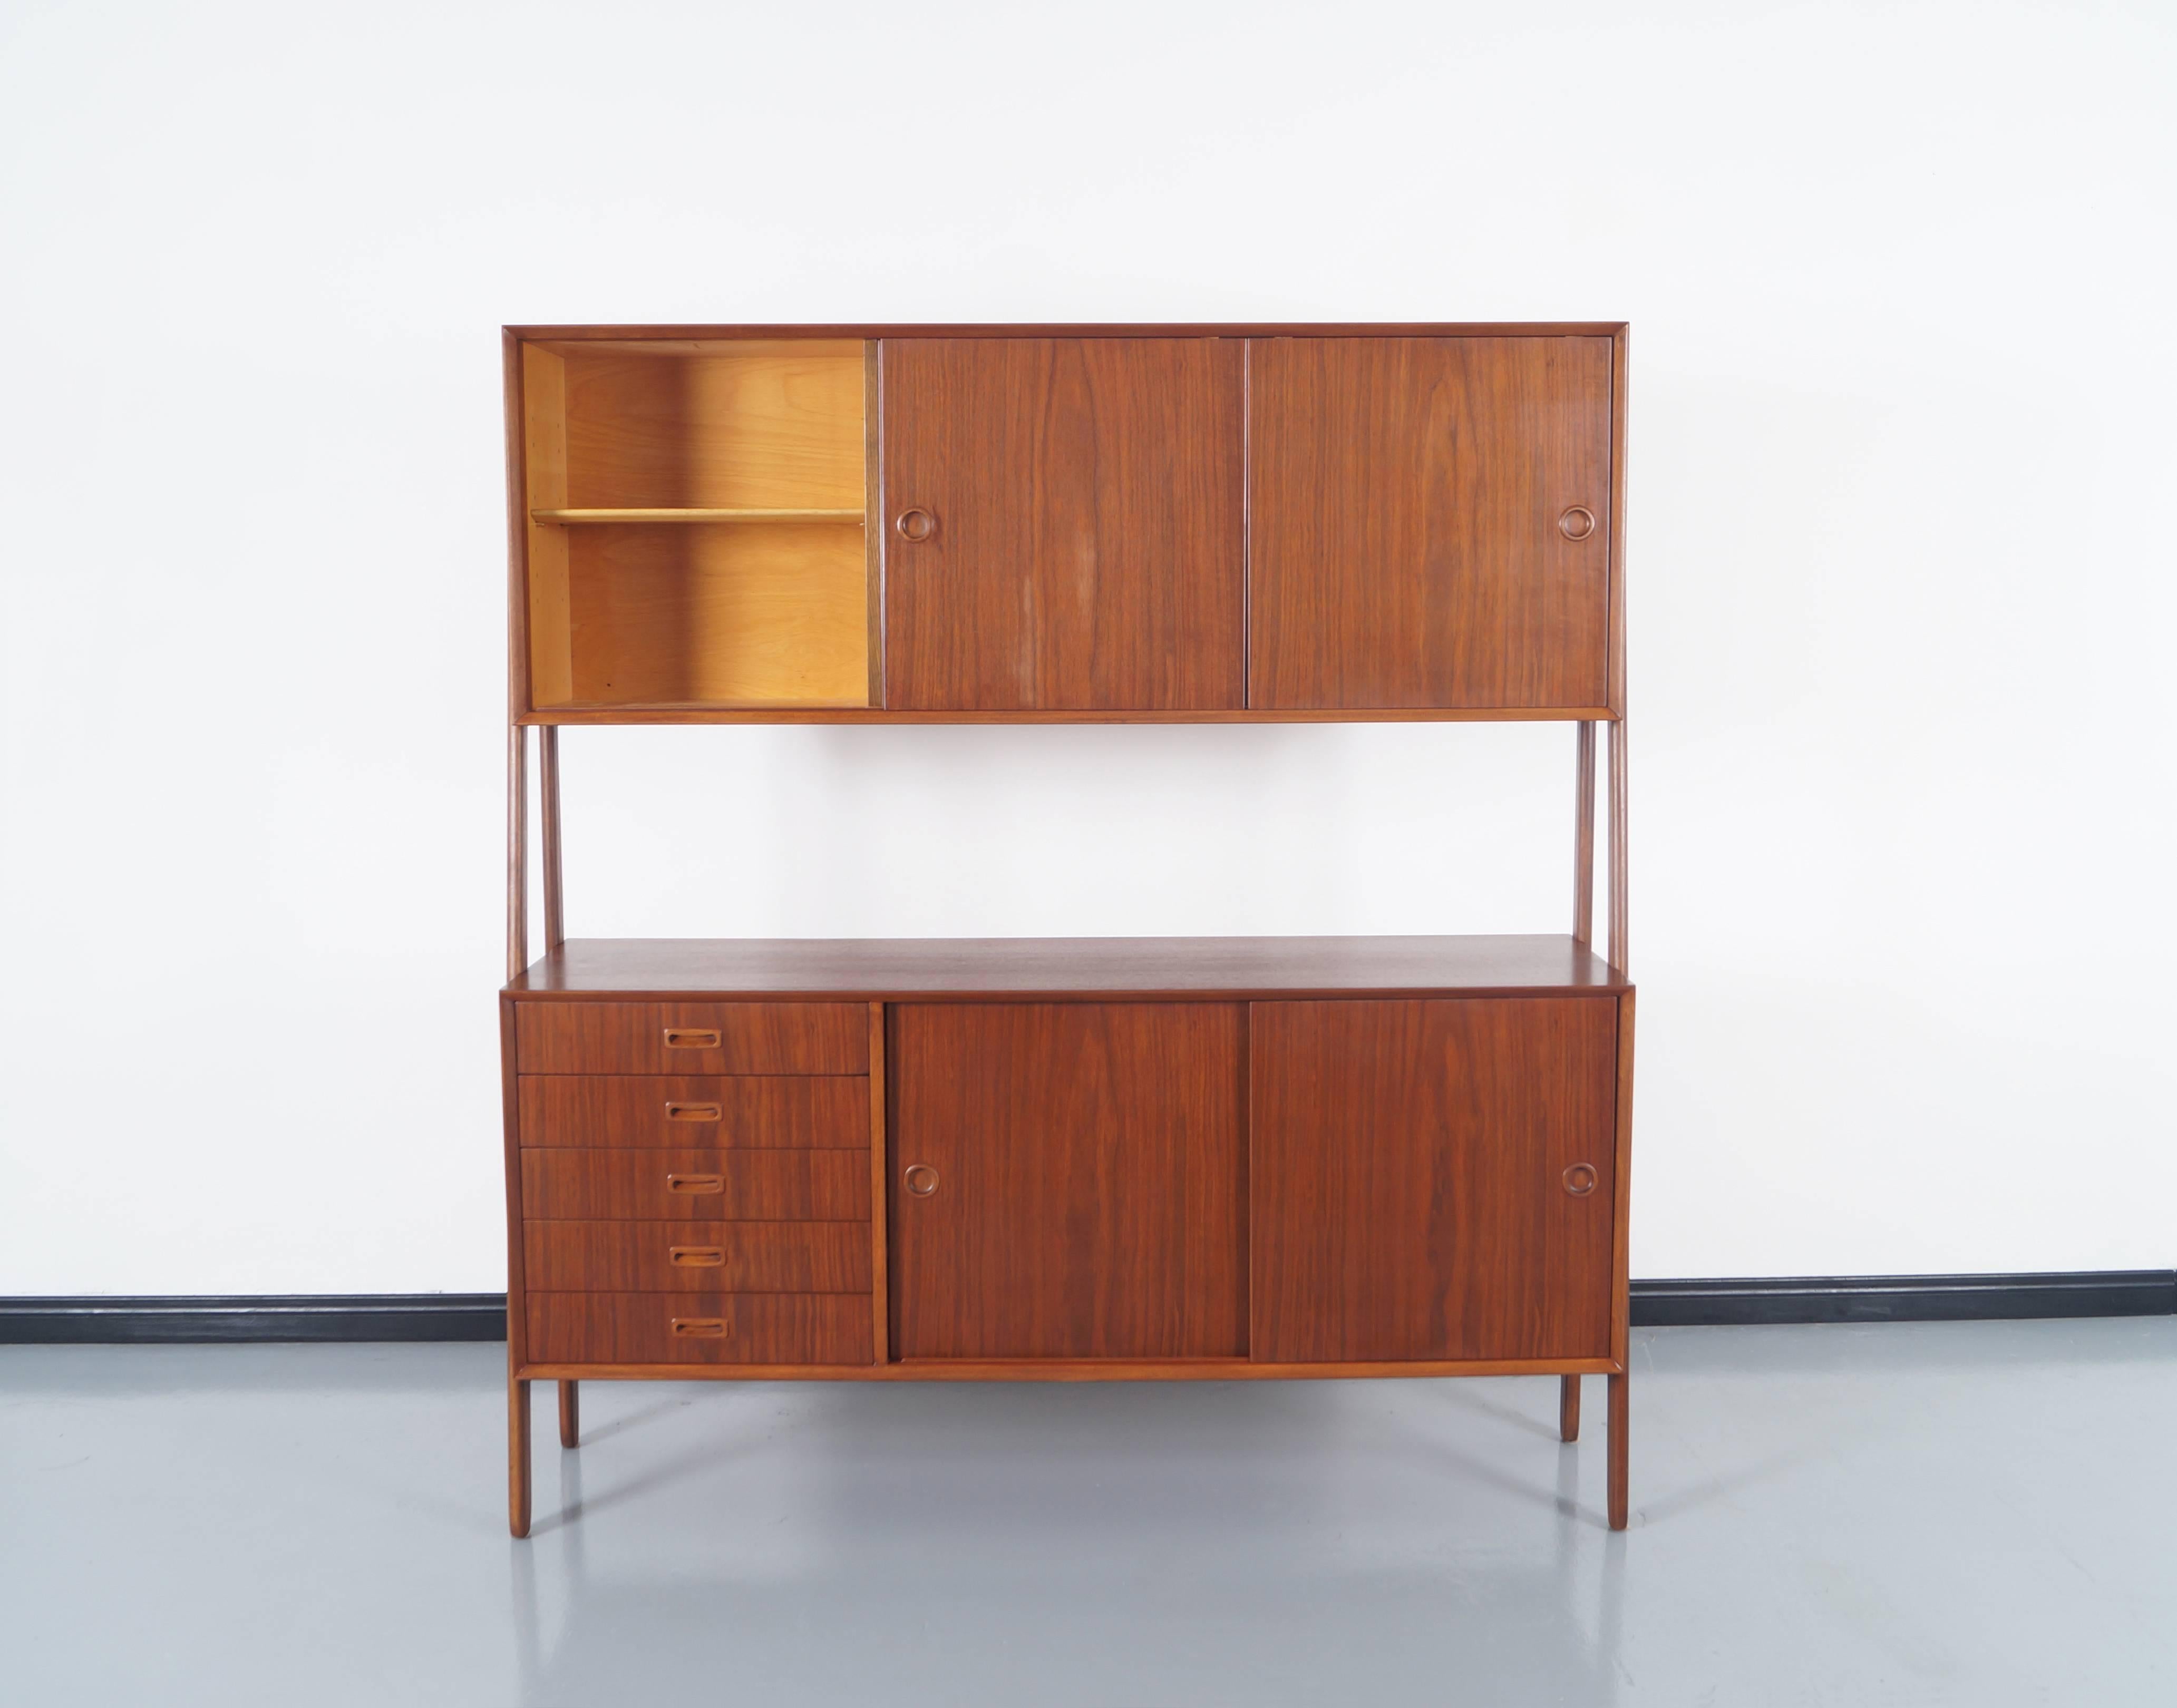 Stunning Danish Modern sideboard by Gunni Omann. The upper portion has sliding doors which open to reveal adjustable shelving, and the lower portion has five drawers on the left side and two sliding with one adjustable shelf inside. Although it